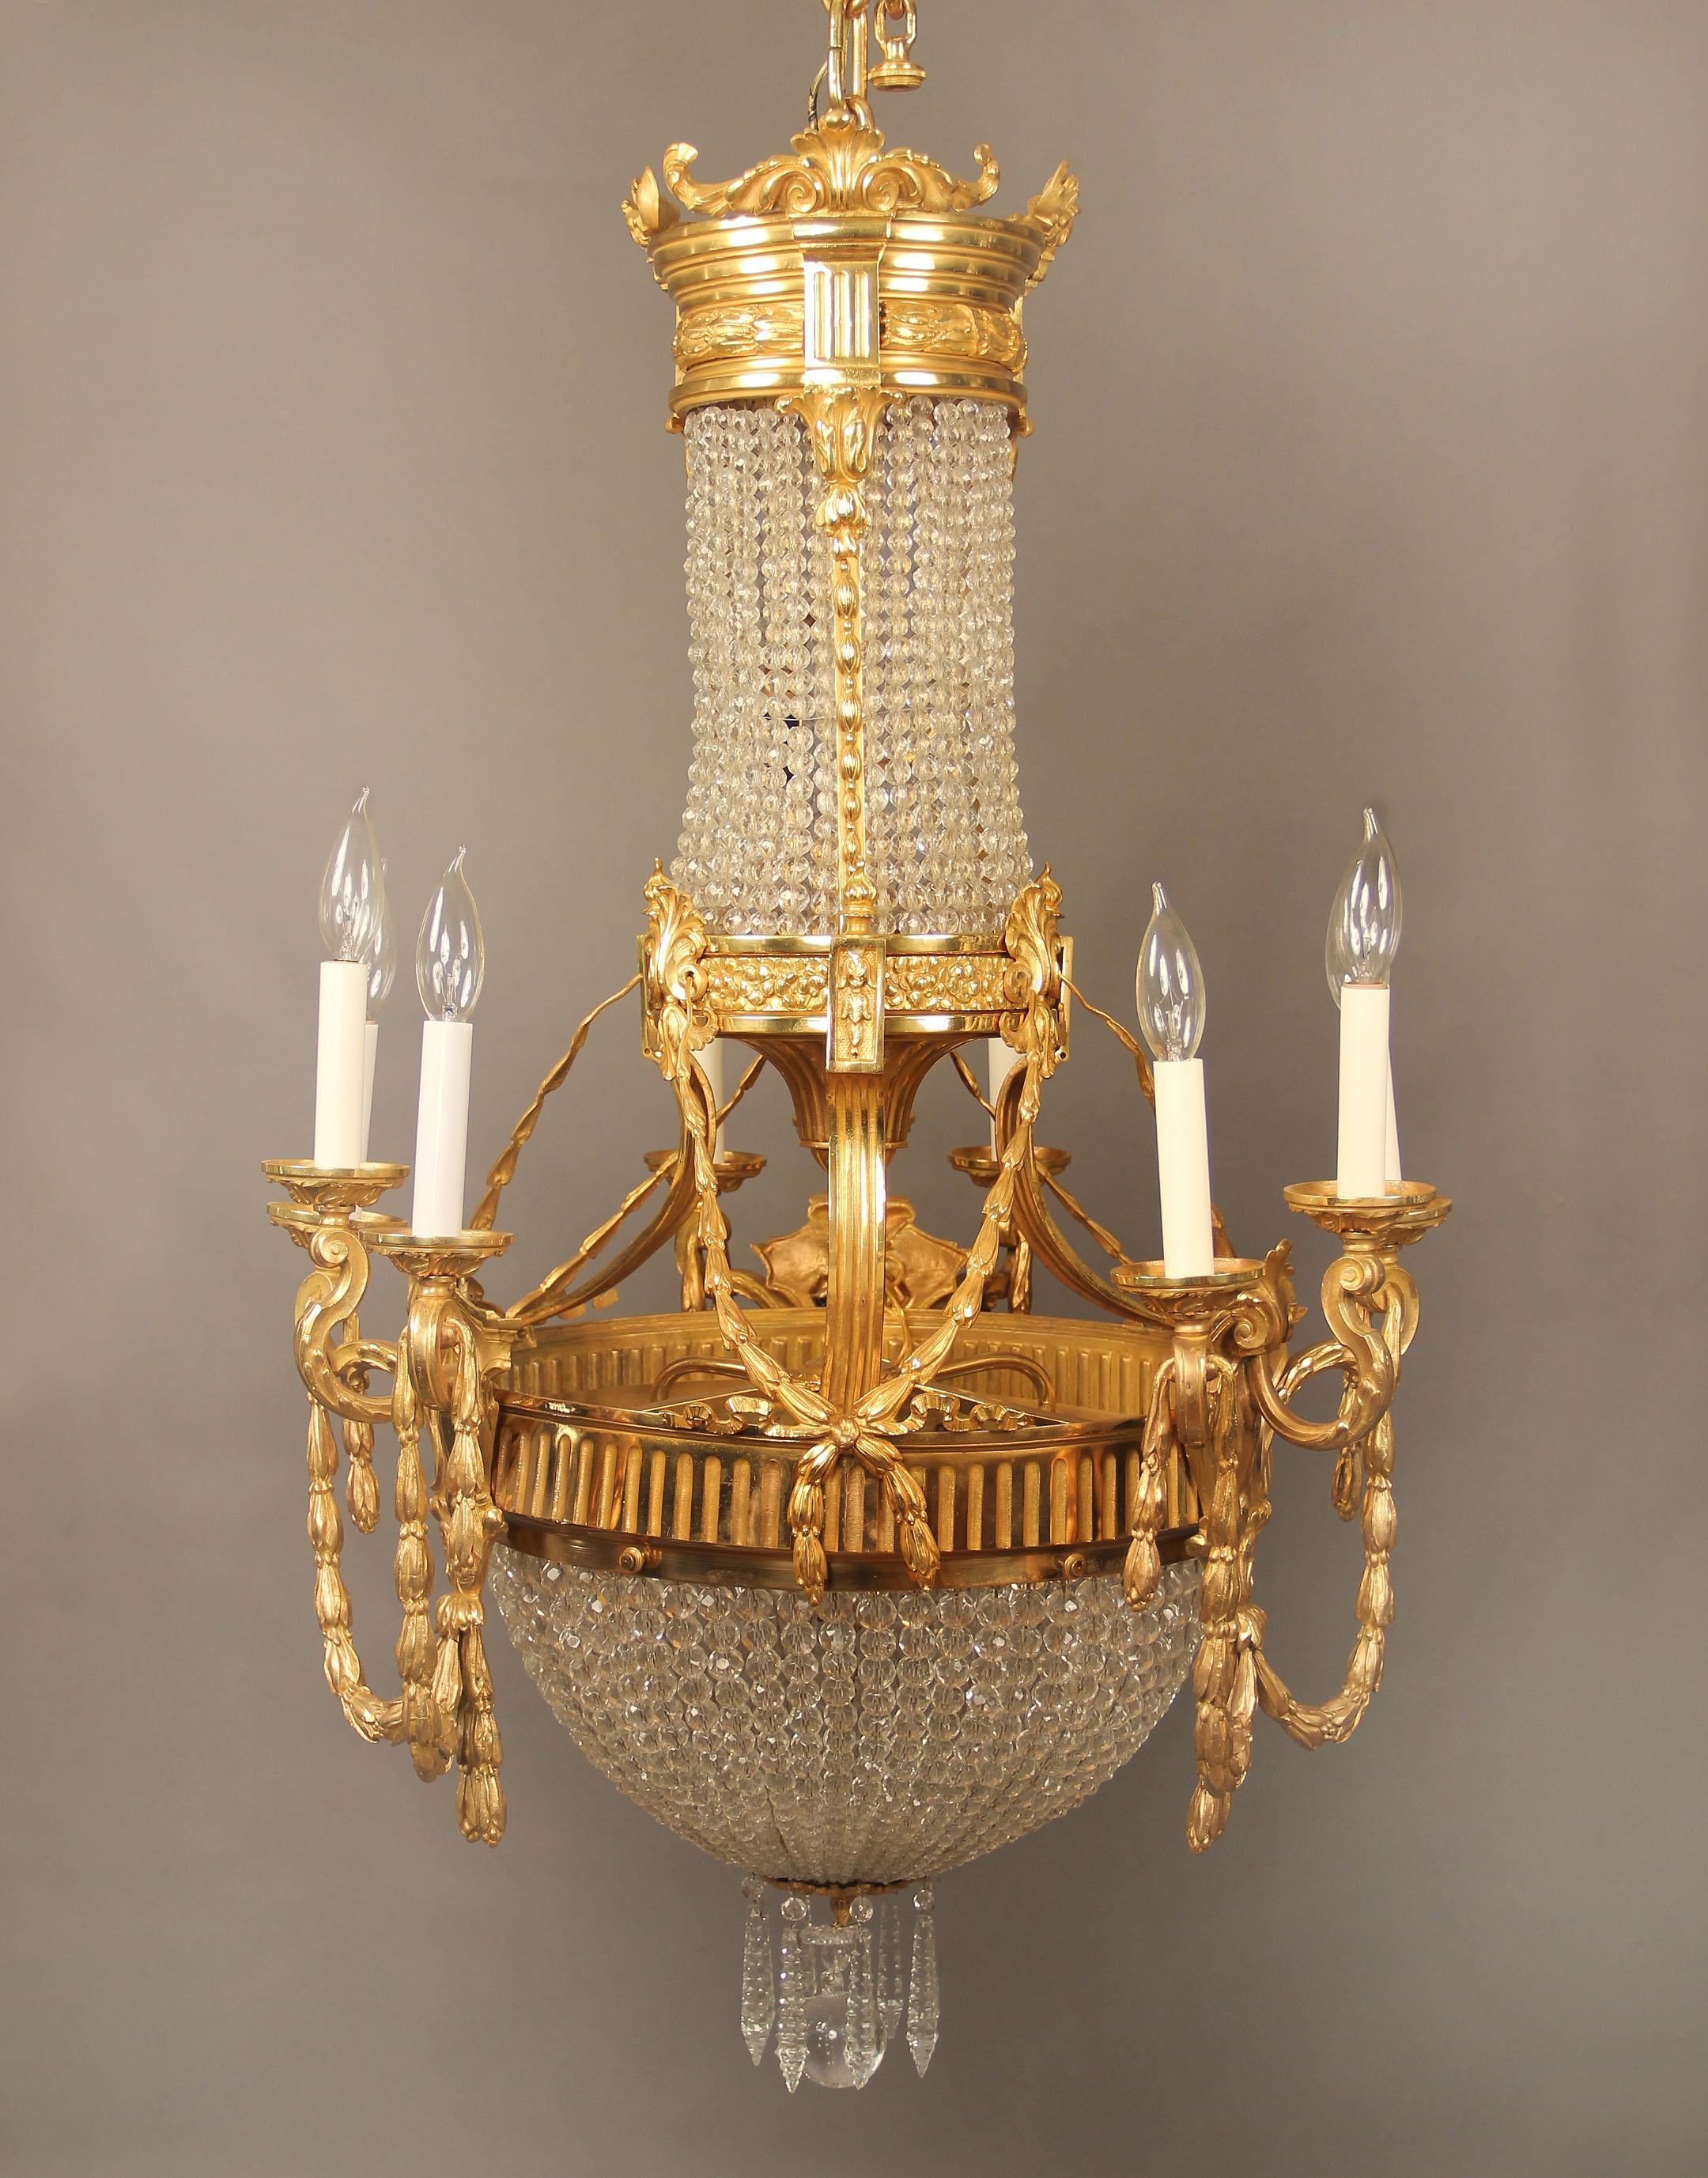 An interesting late 19th century gilt bronze and crystal fifteen-light basket chandelier.

Bronze rope and bow designs along the body and arms, crystal beaded body and basket, nine perimeter and six-tiered interior lights.

If you are looking